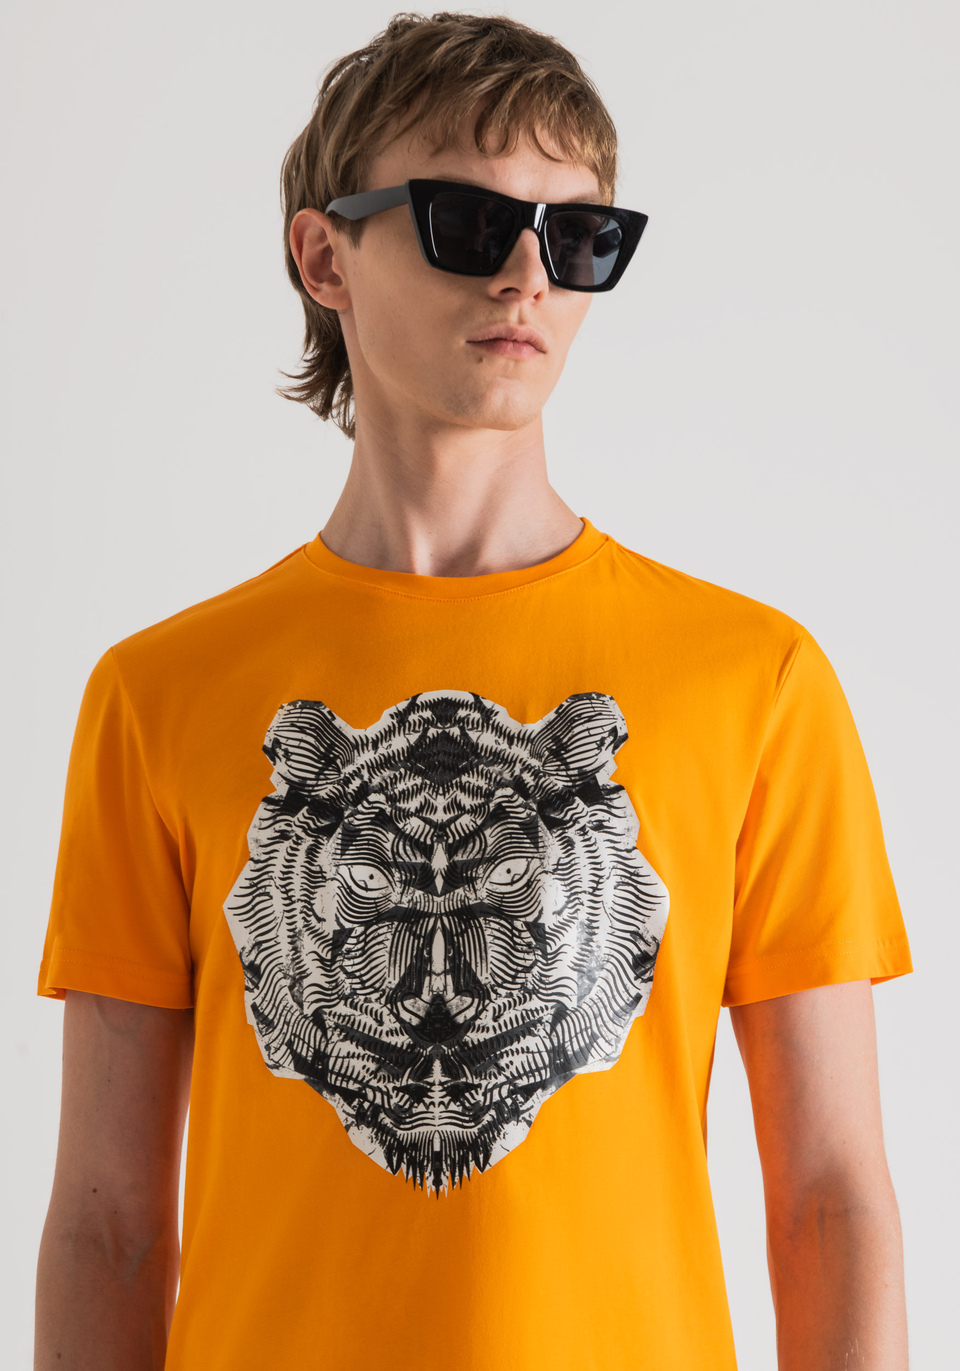 SLIM-FIT T-SHIRT IN SOFT COTTON WITH TIGER PRINT - Antony Morato Online Shop